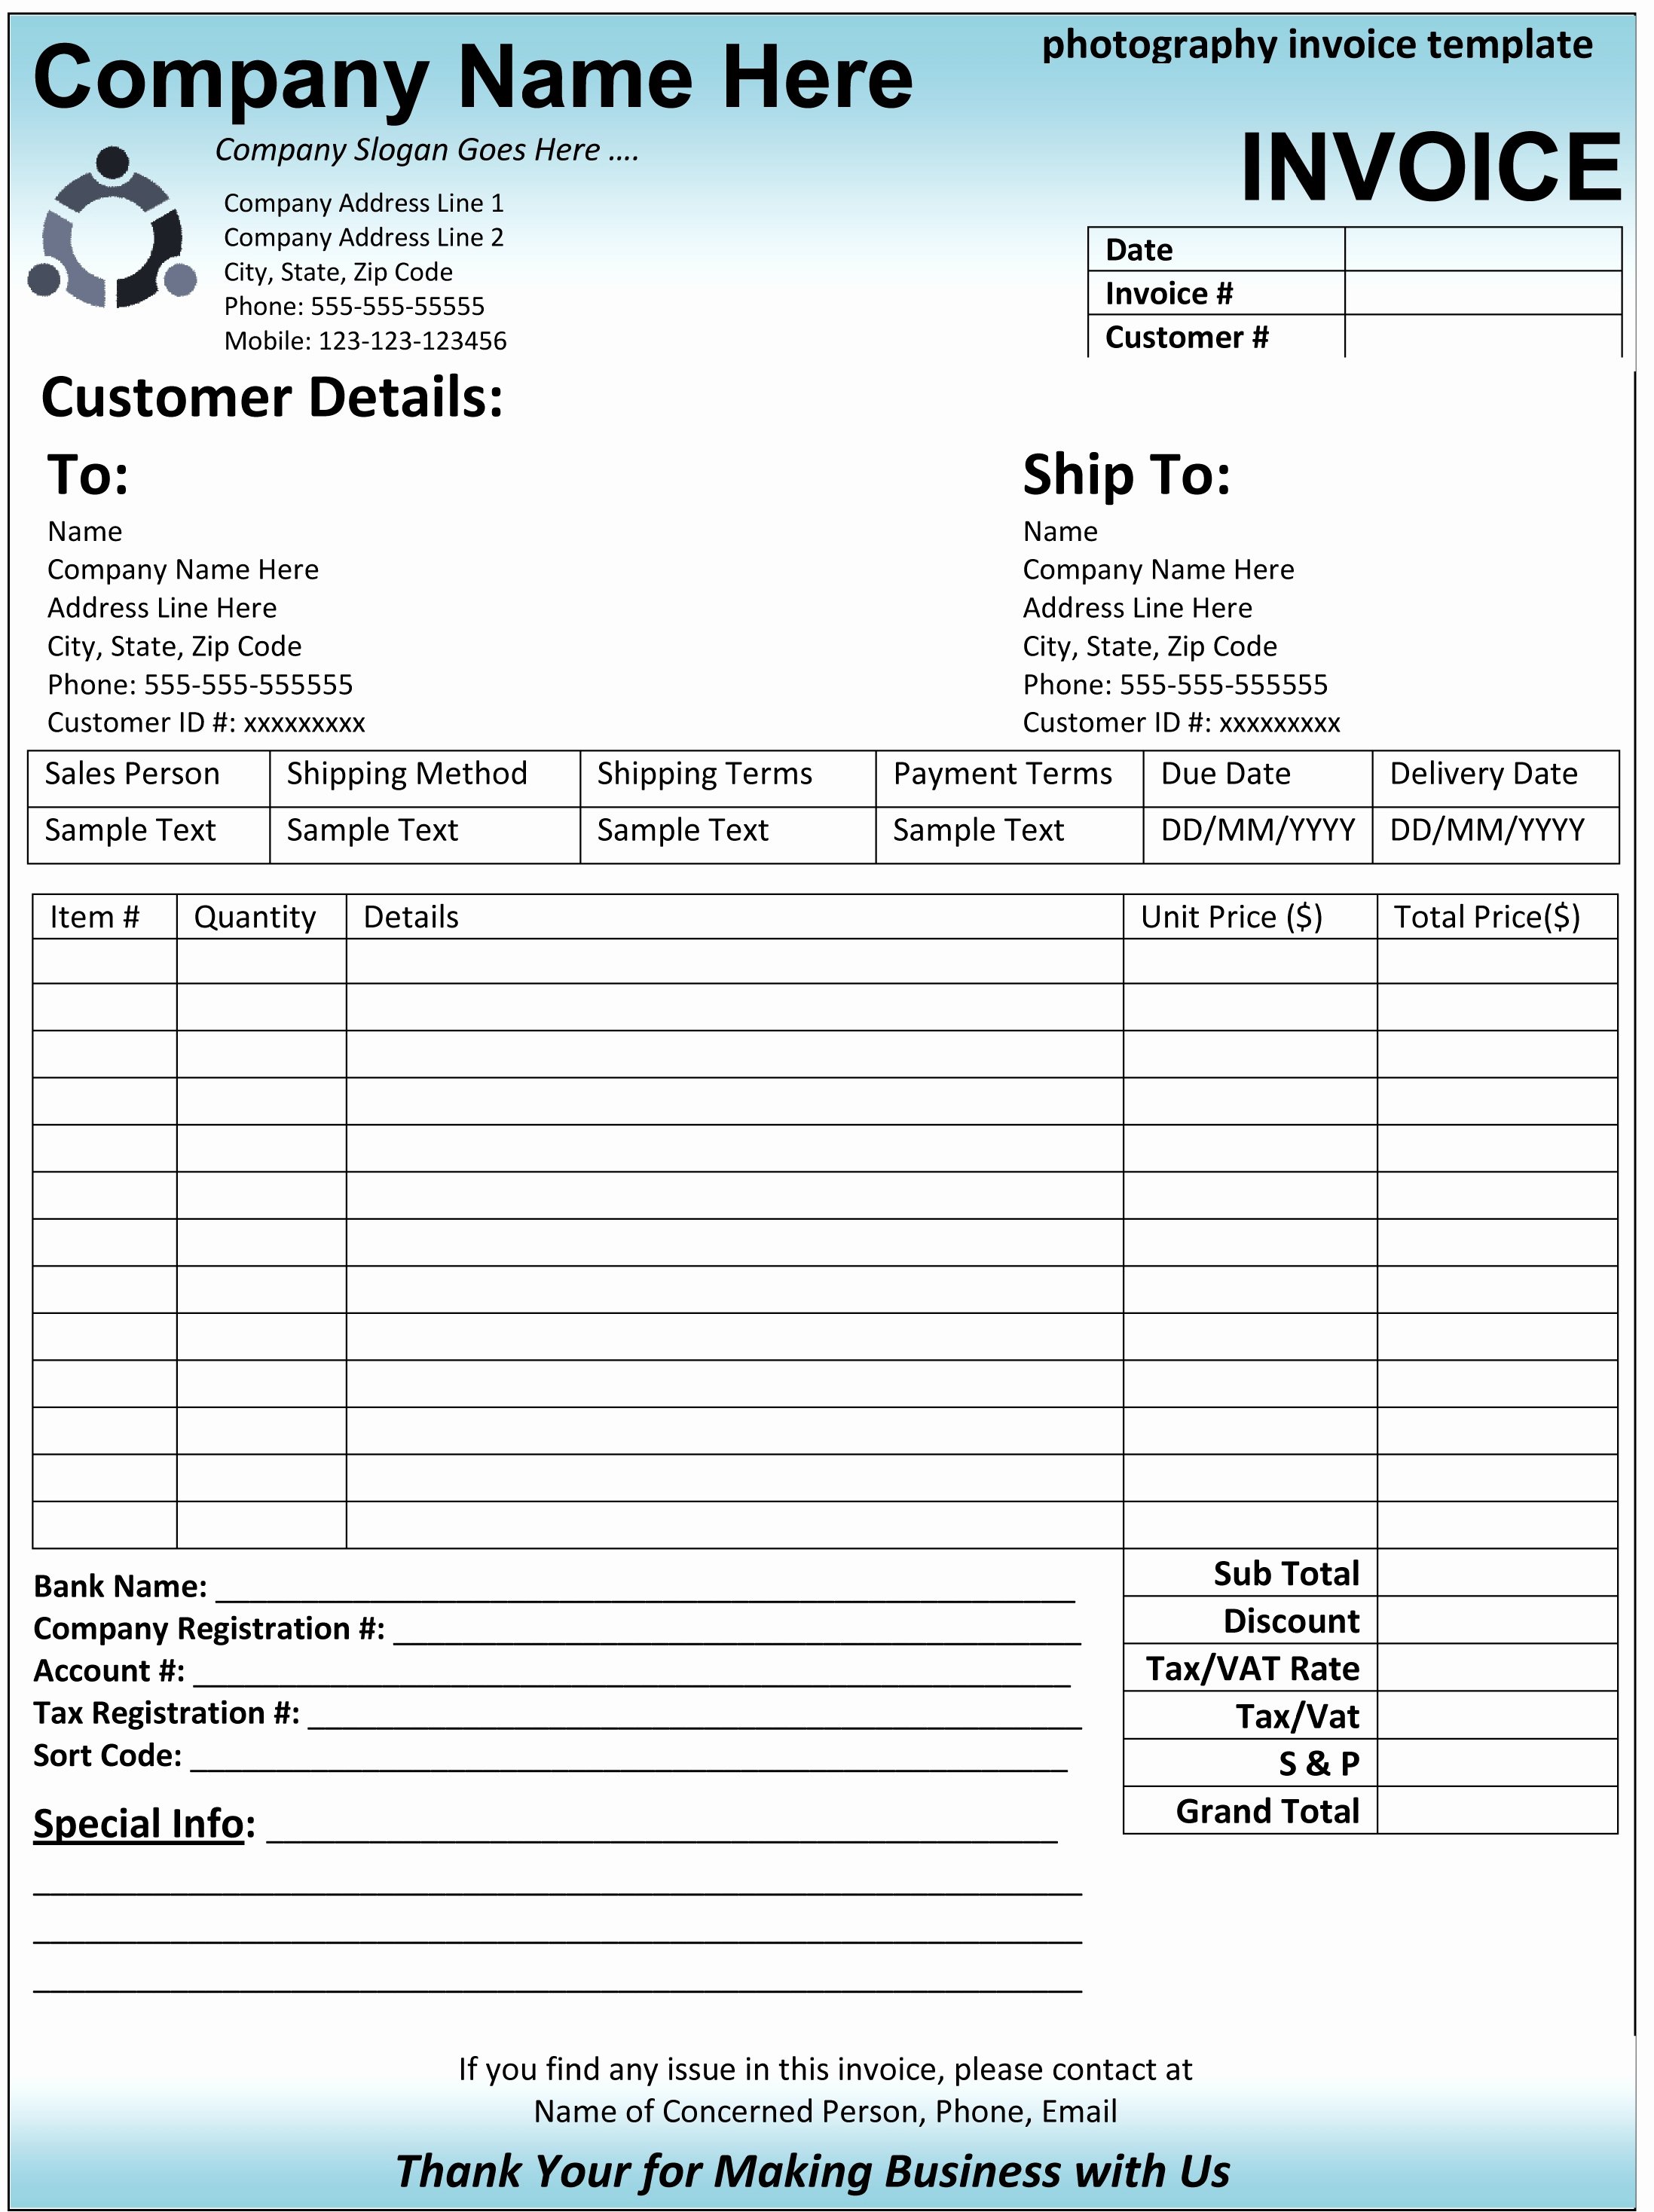 Free Photography Invoice Template Fresh Quick Invoice Template